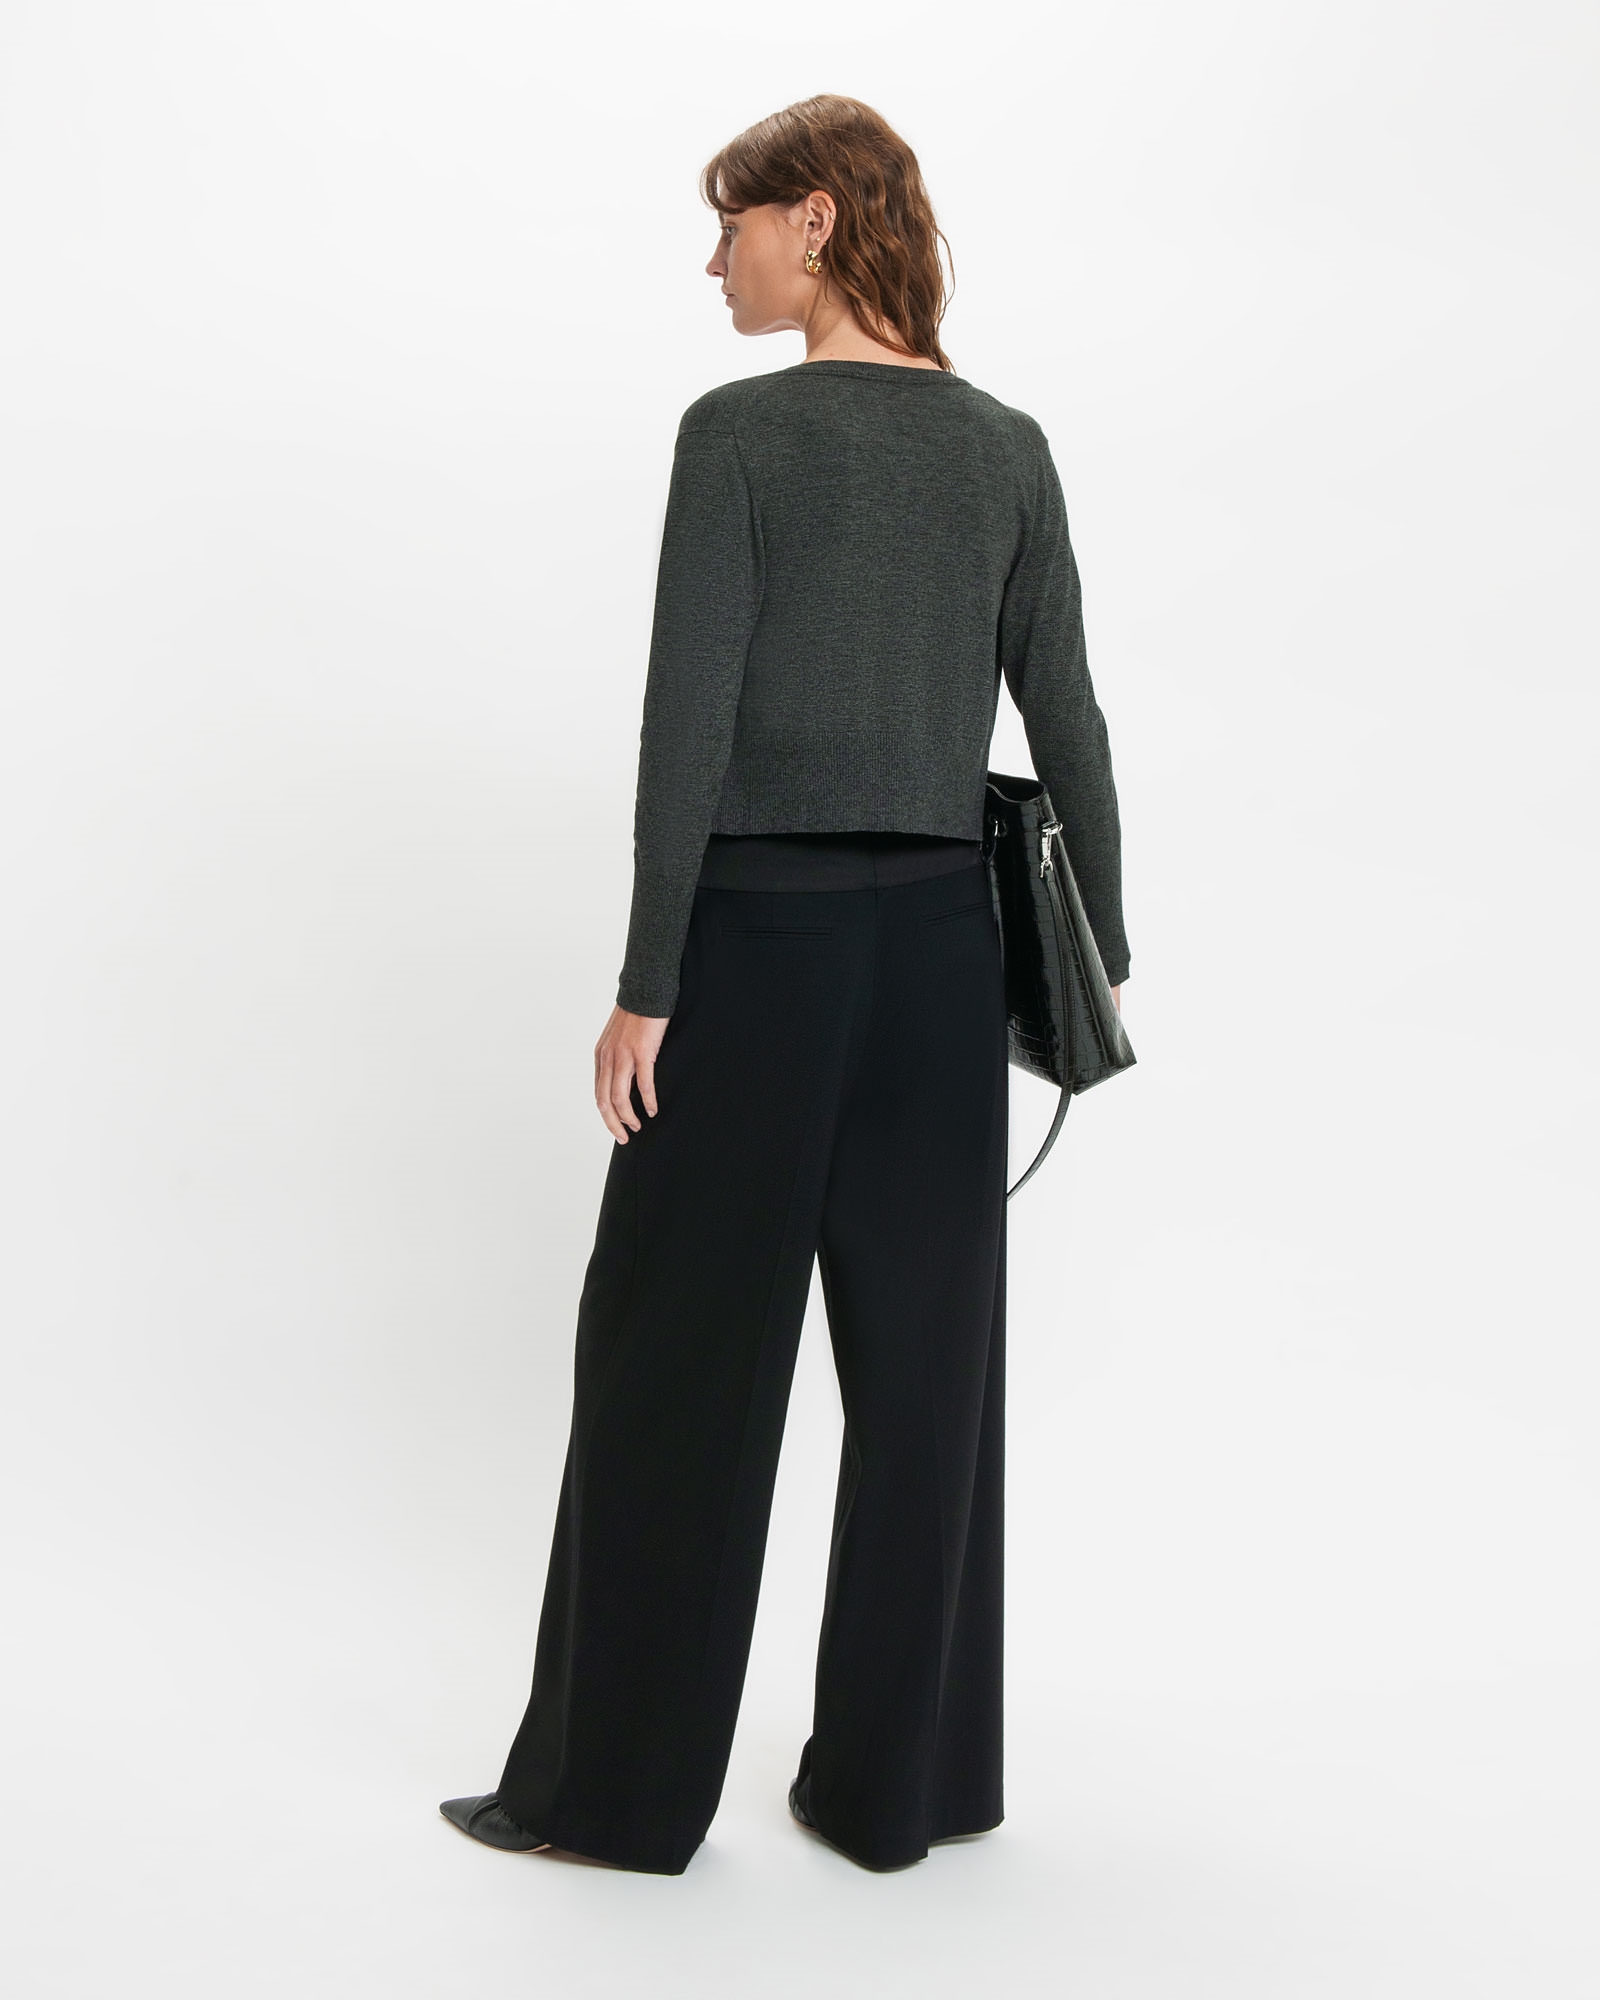 Knitwear | Cropped Round Neck Cardigan | 950 Charcoal